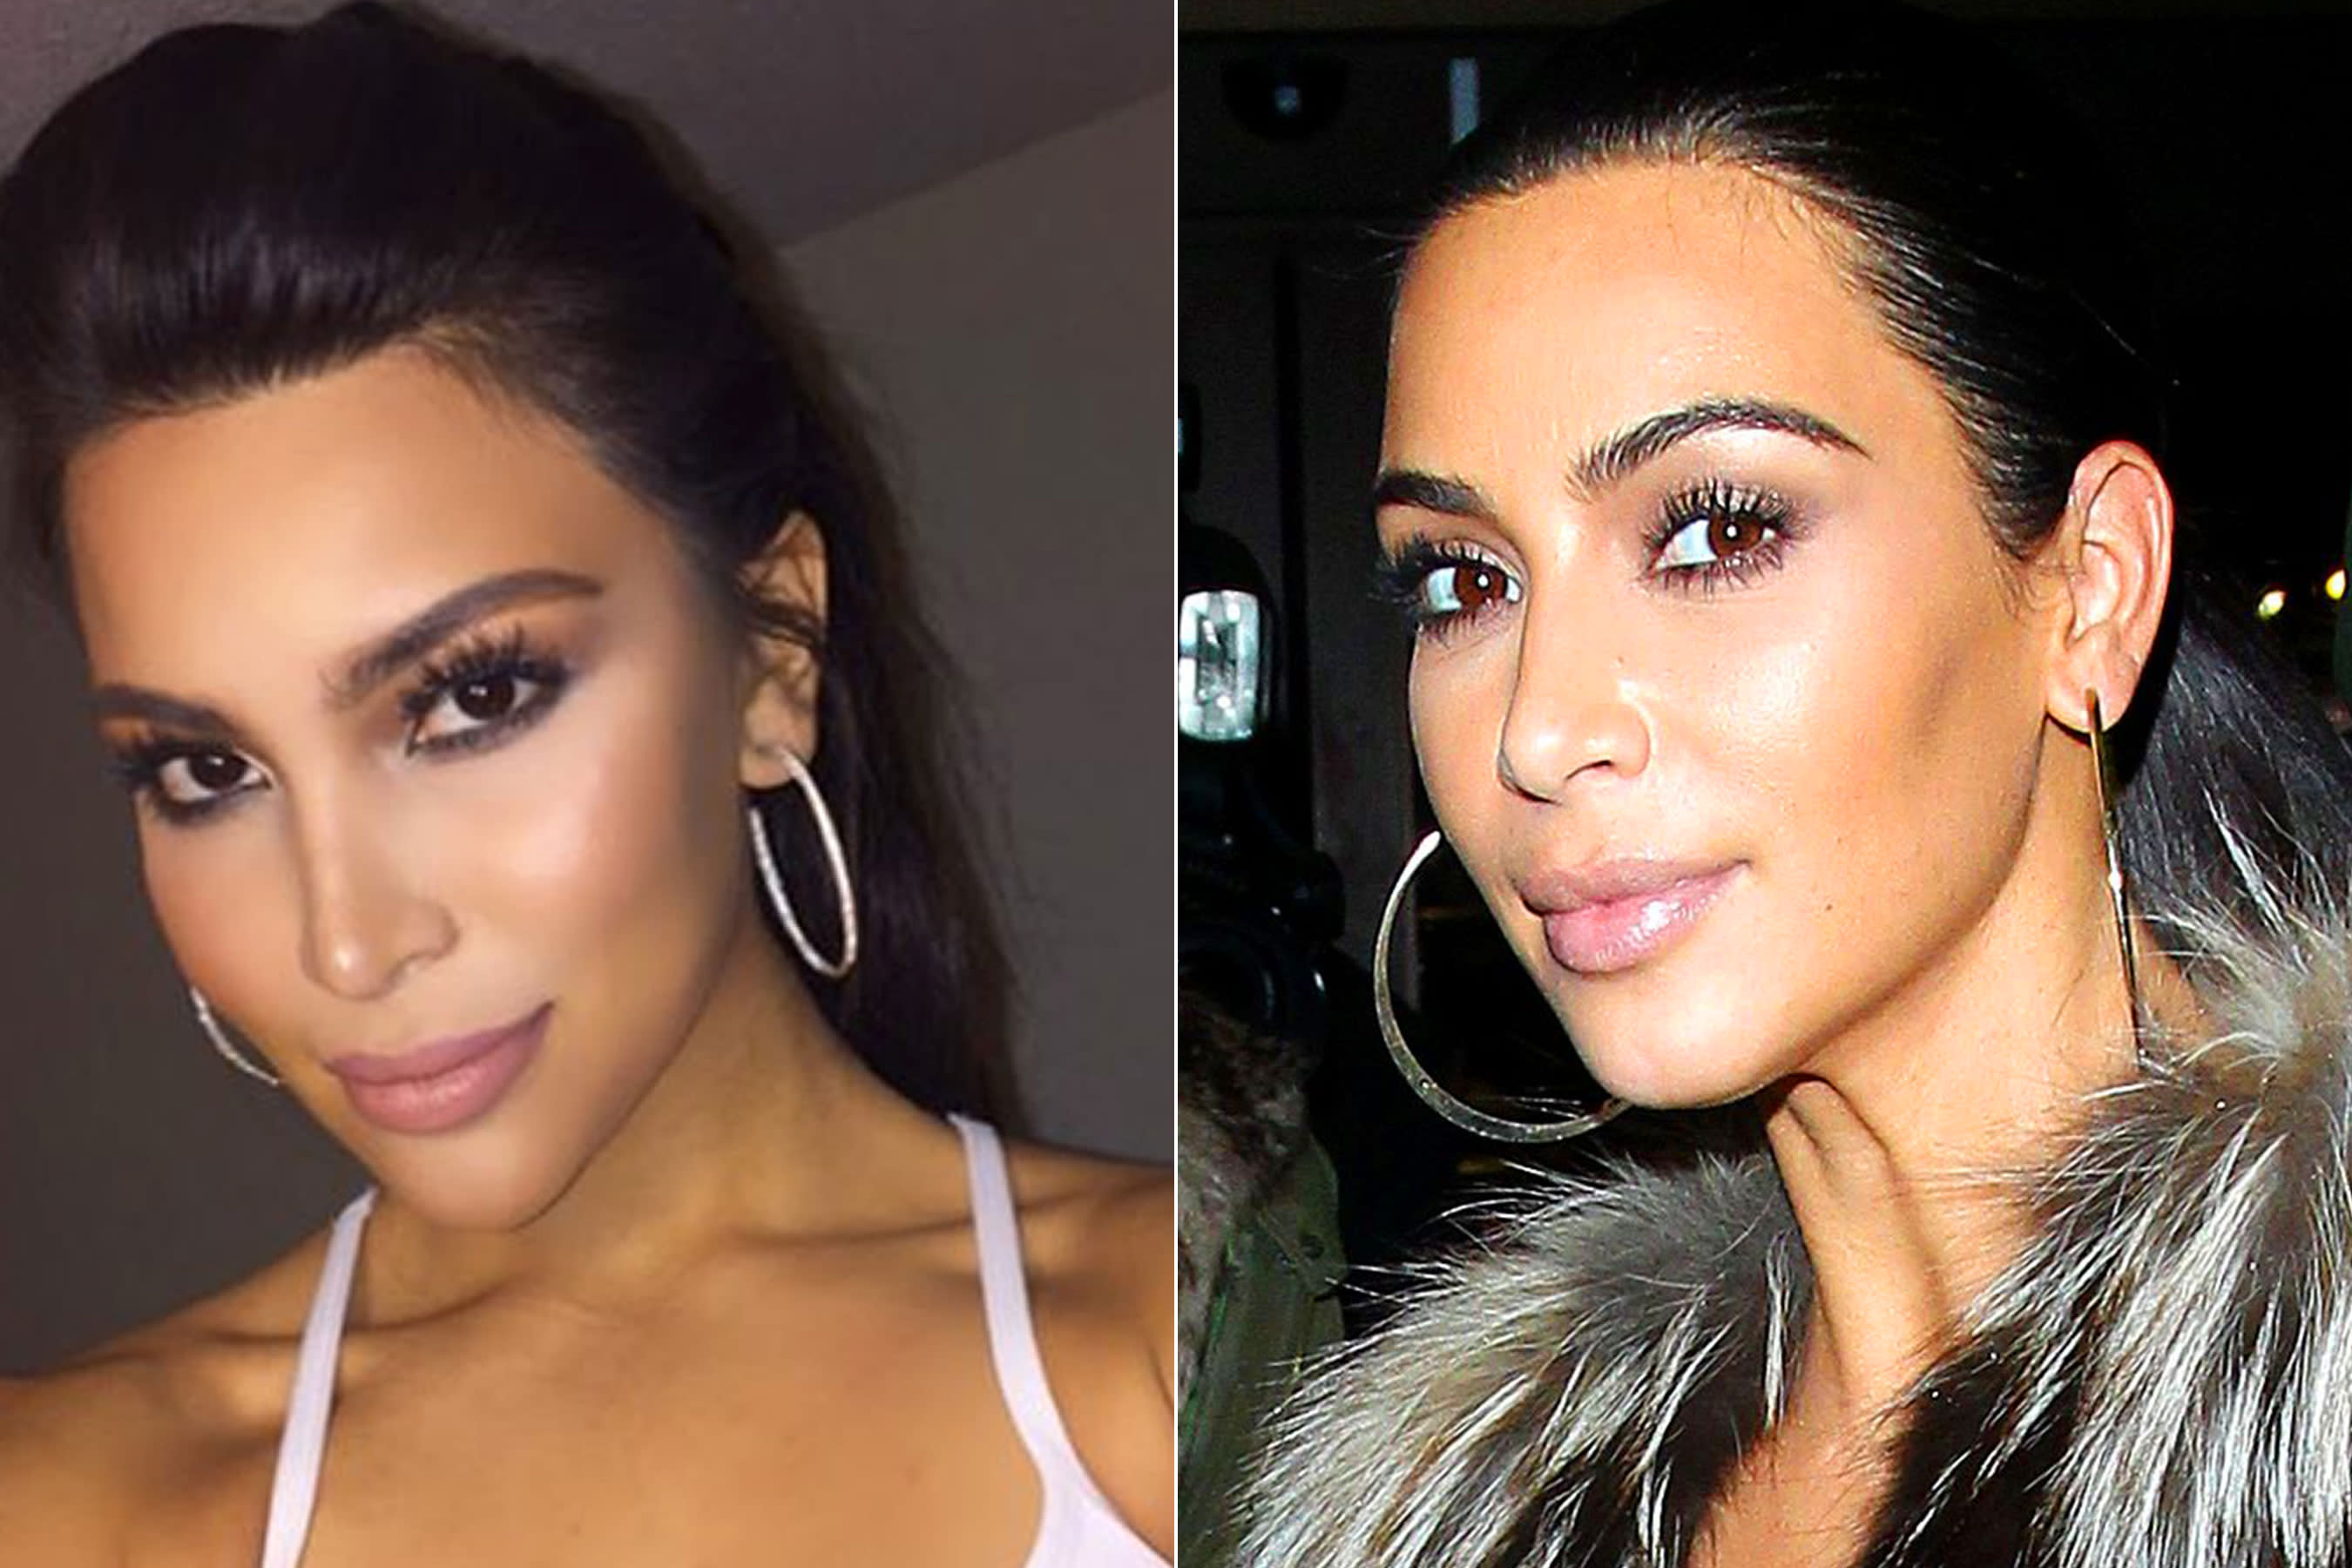 Kim Kardashian Shares Her Thoughts On Fans Getting Plastic Surgery To